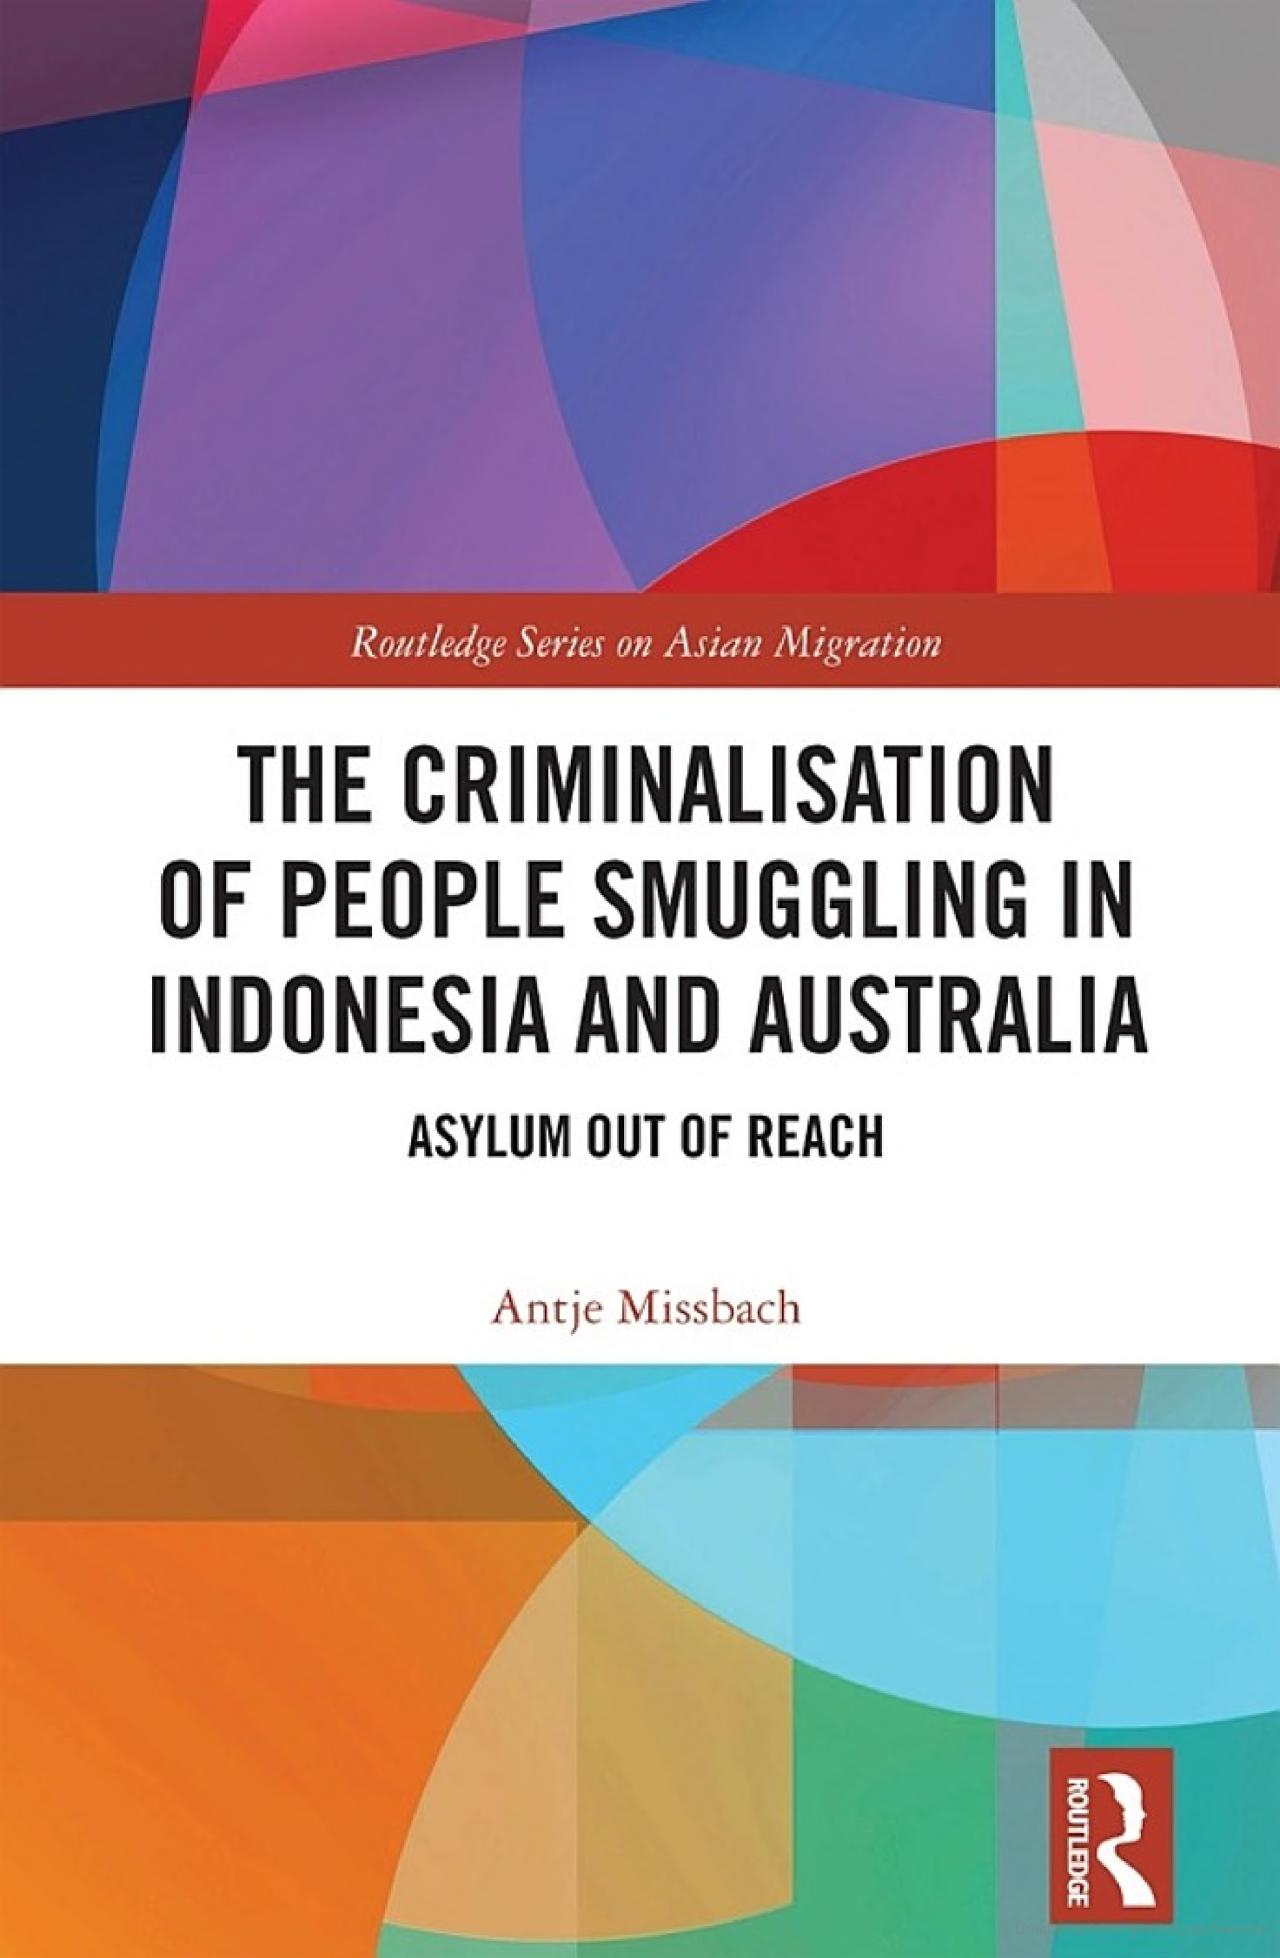 The criminalisation of people smuggling in Idonesia and Australia